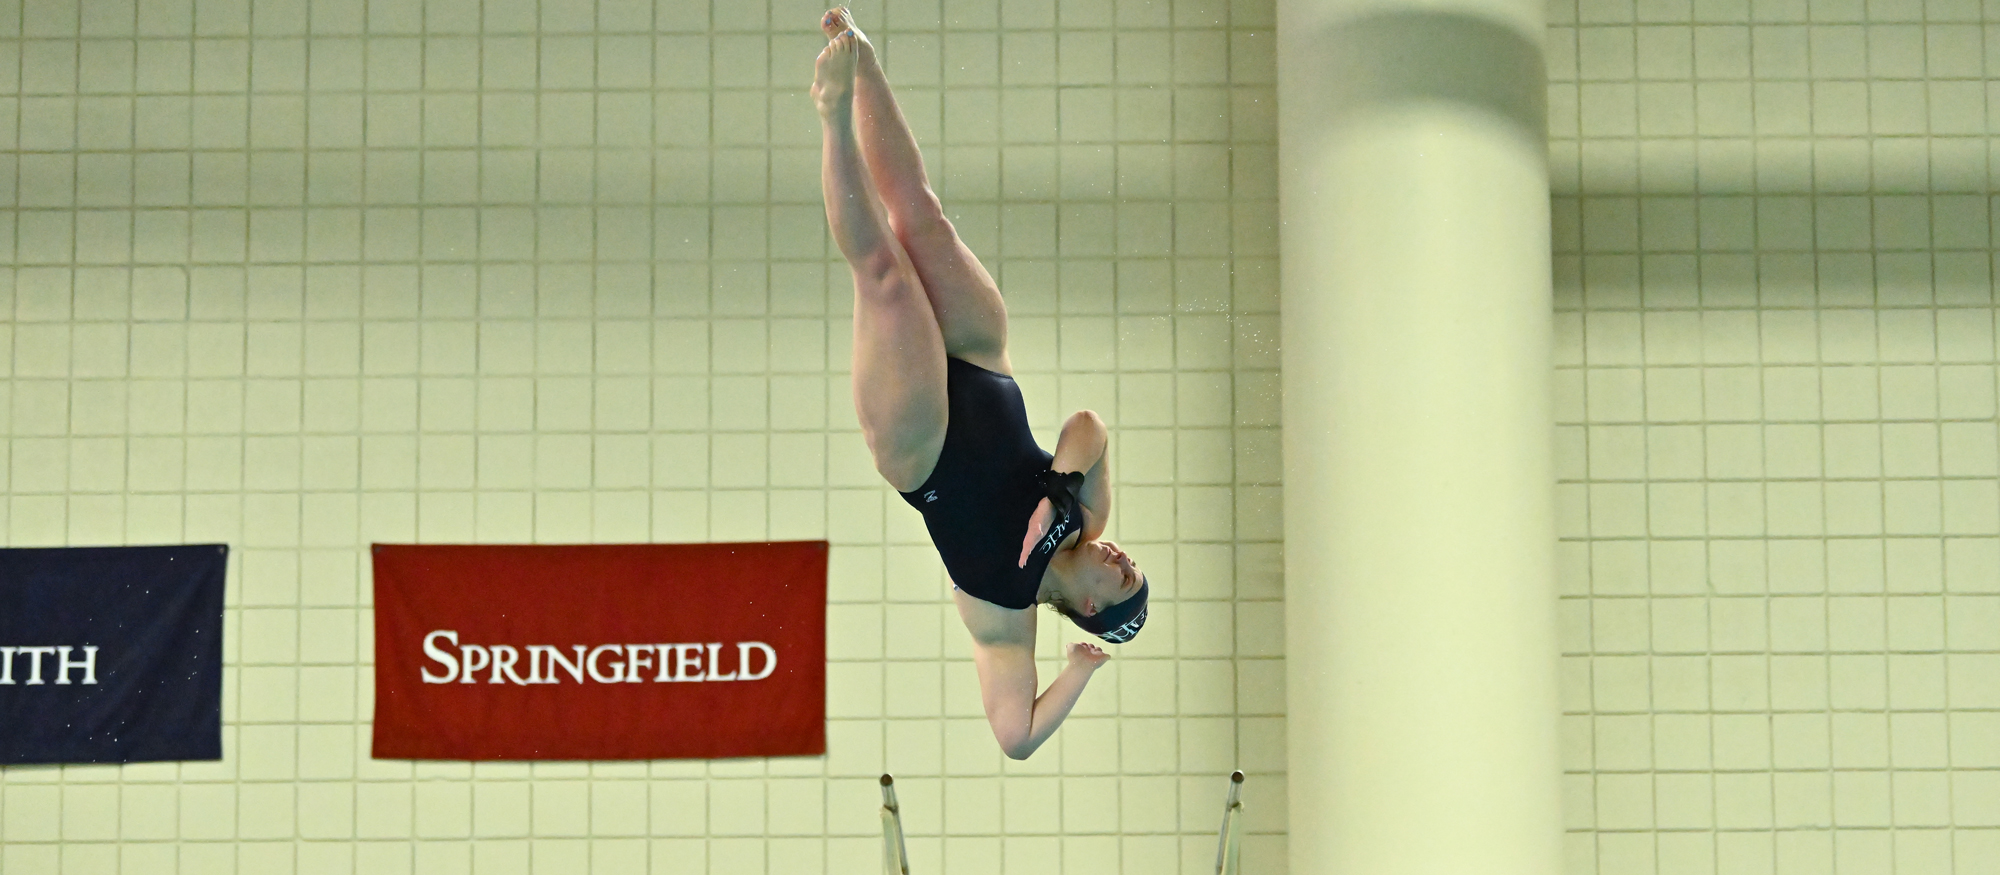 Maddy Sewell dives at NCAA Regionals at Colby College March 1-2. (RJB Sports file photo)